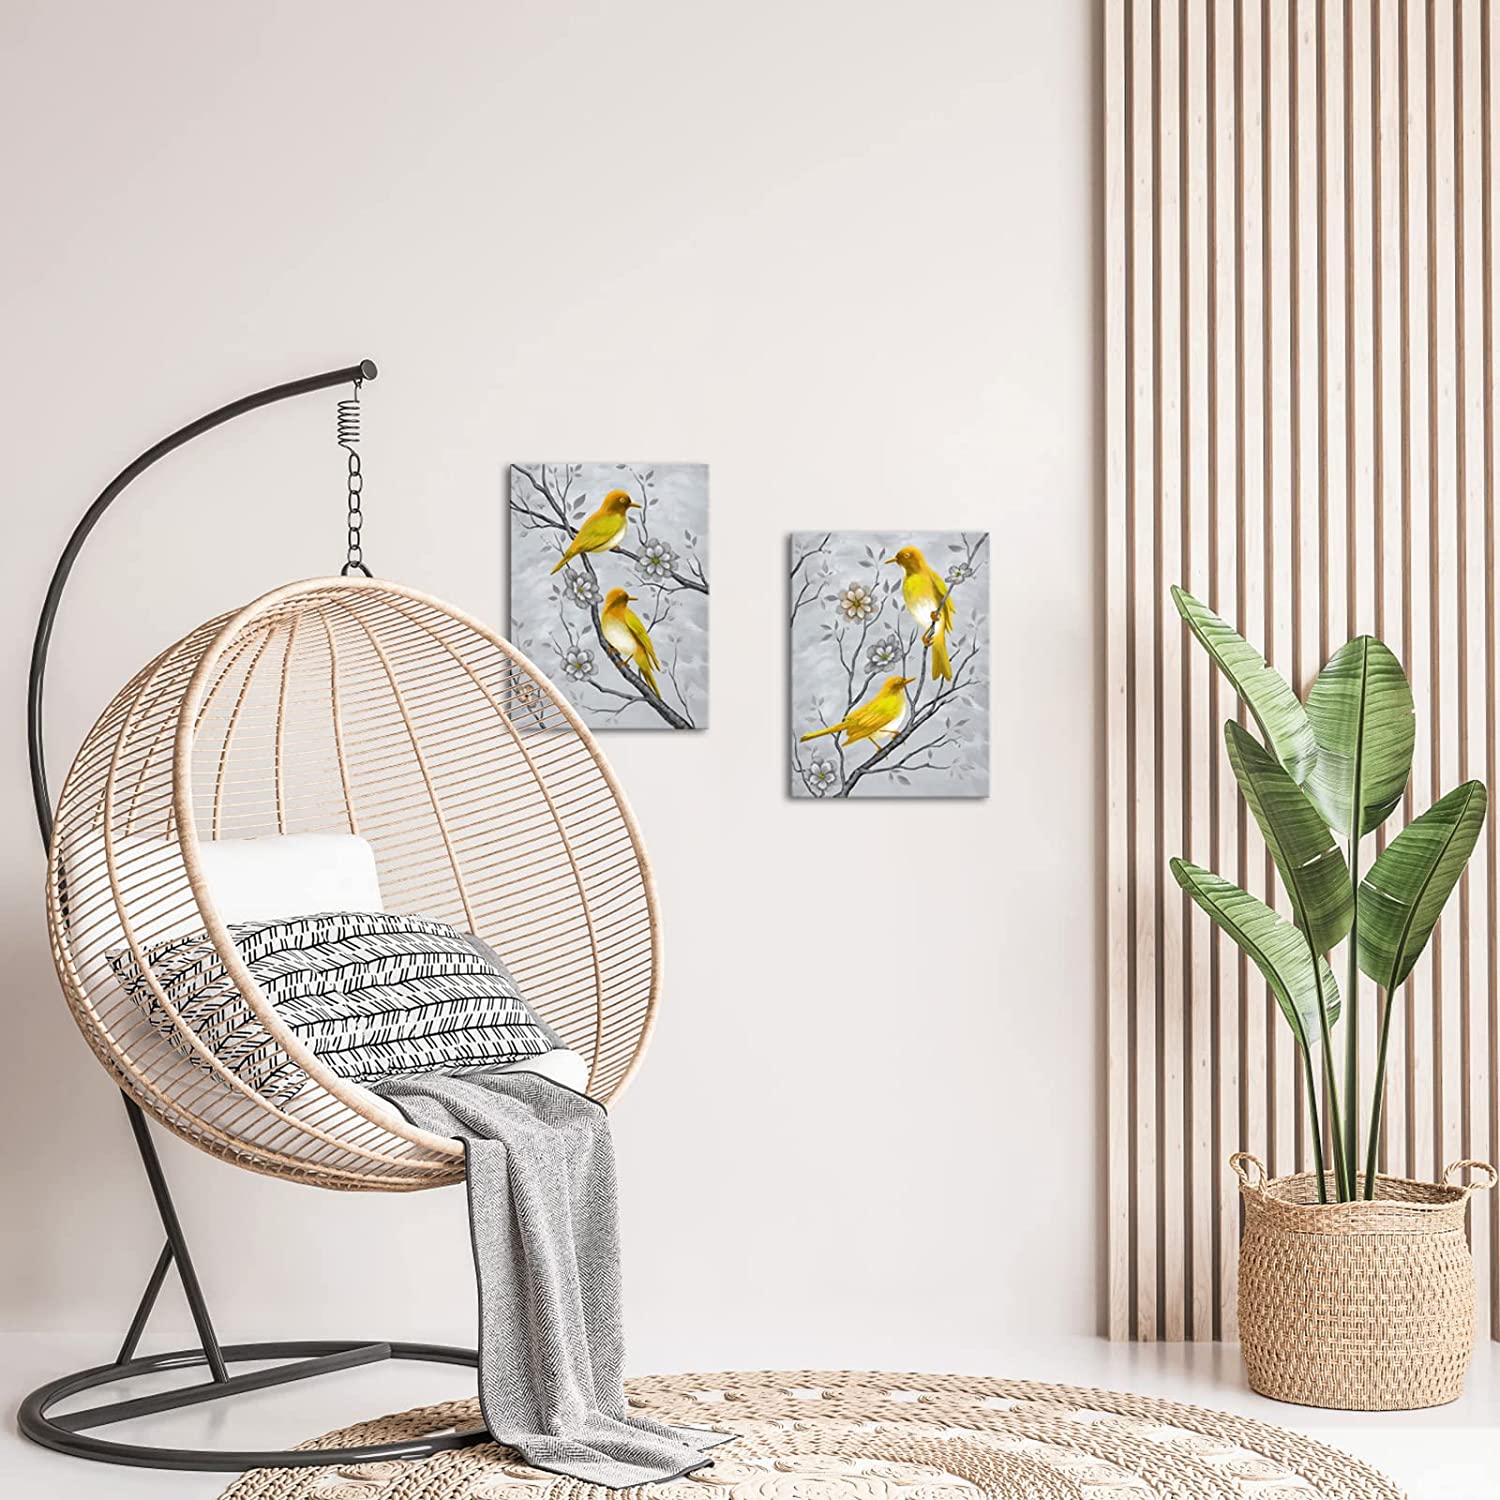 2 Piece Bird Wall Art Sets Yellow and Grey Painting Ready to Hang